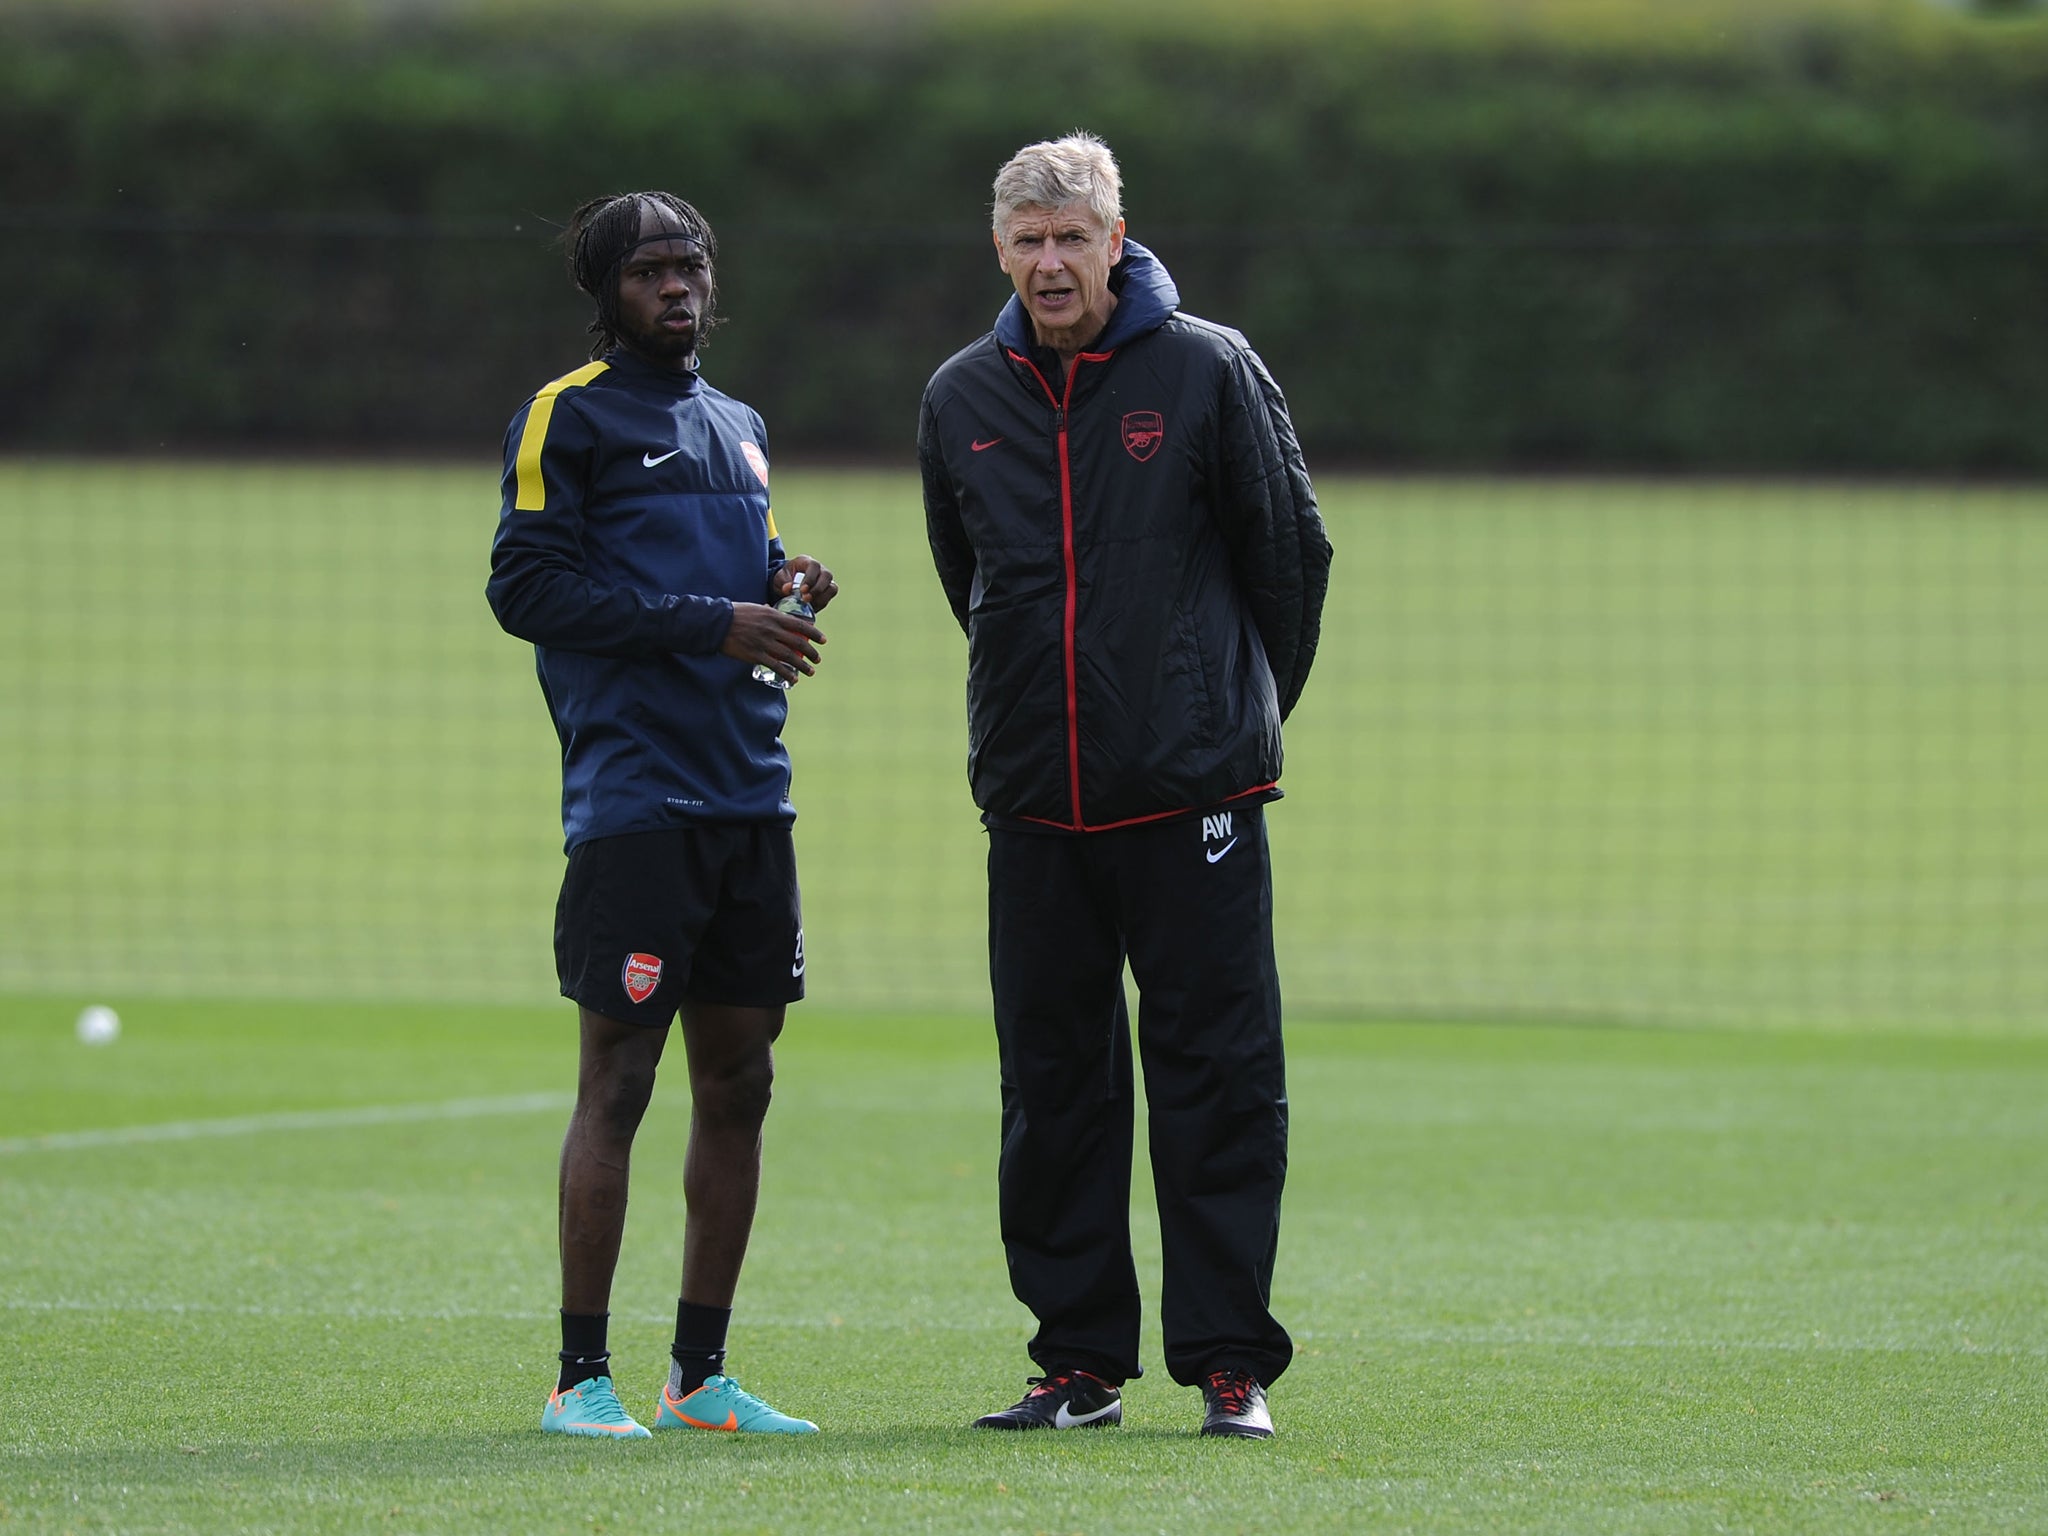 Gervinho has criticised his former manager Arsene Wenger over his lack of playing time at Arsenal